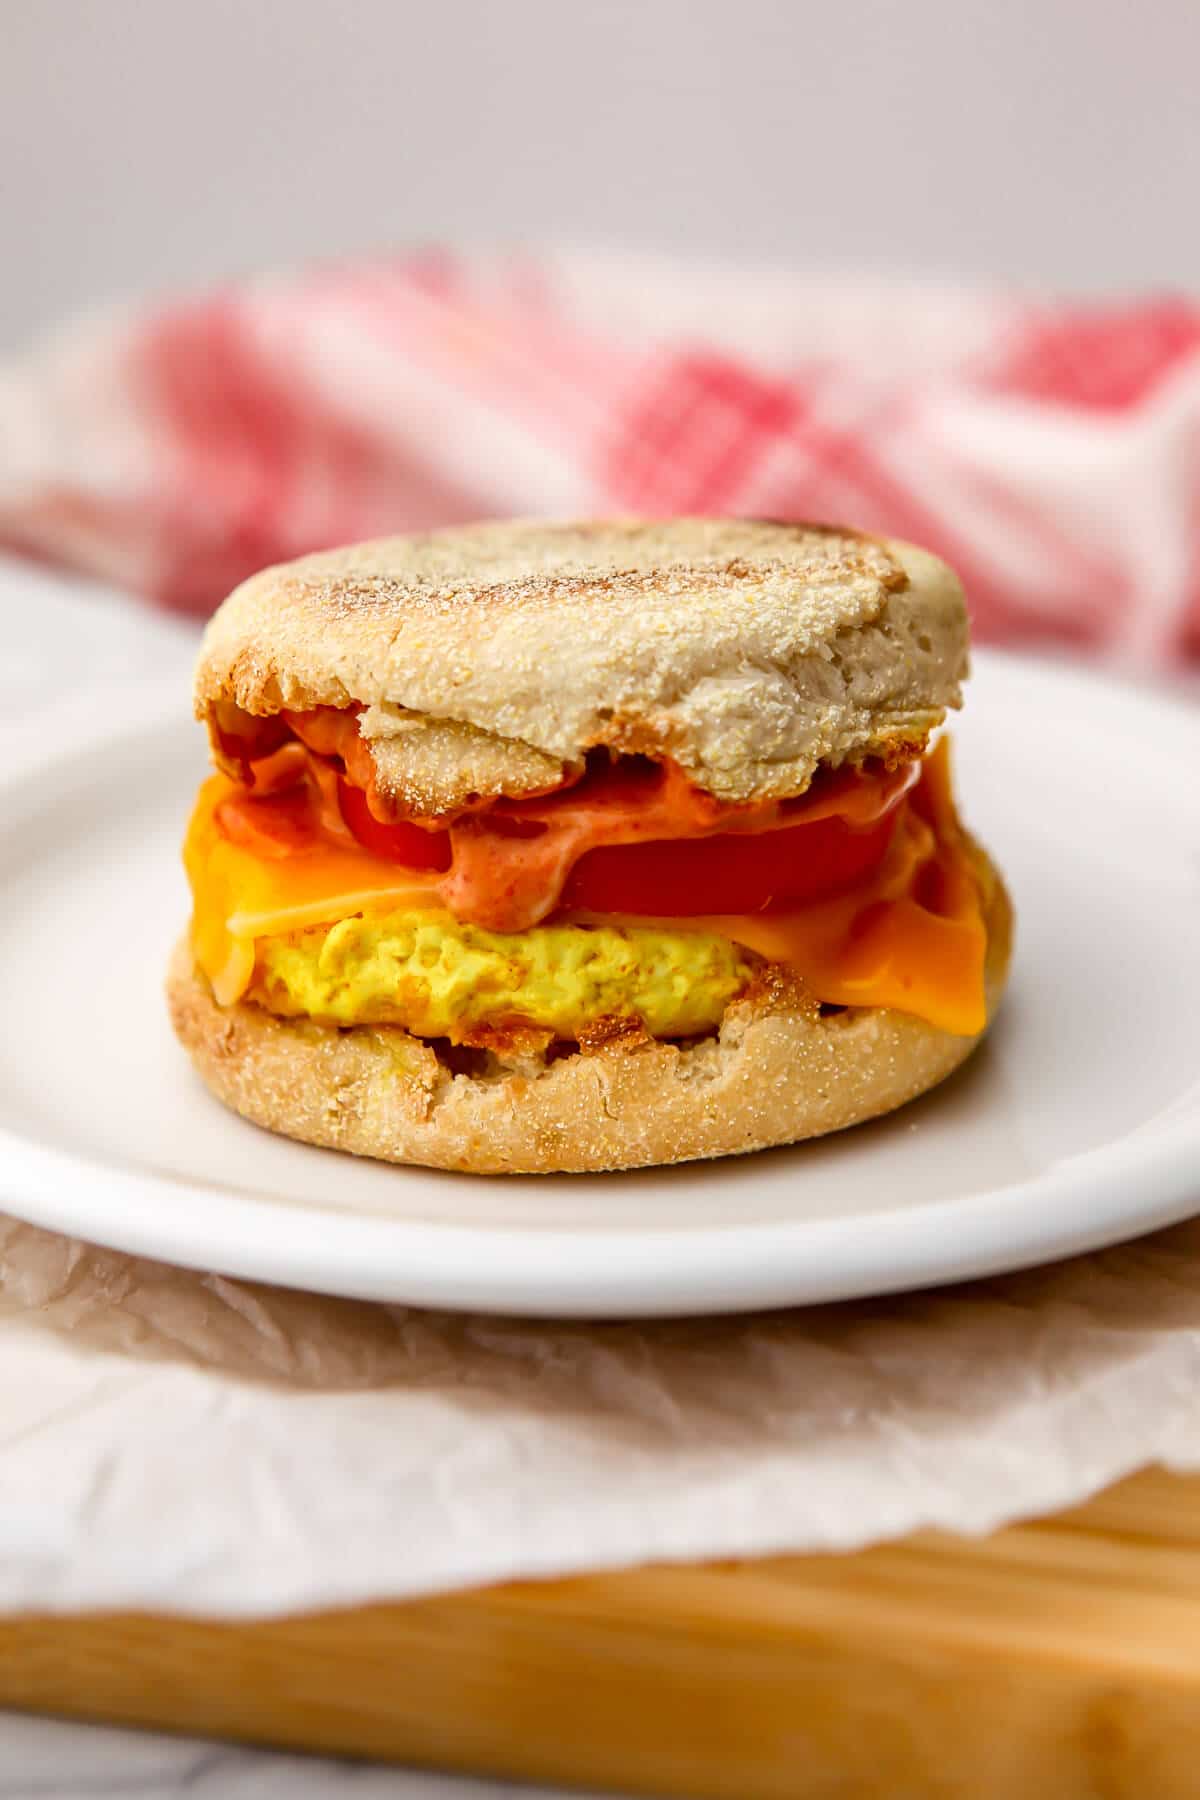 A tofu egg sandwich with cheese and tomato on a white plate.